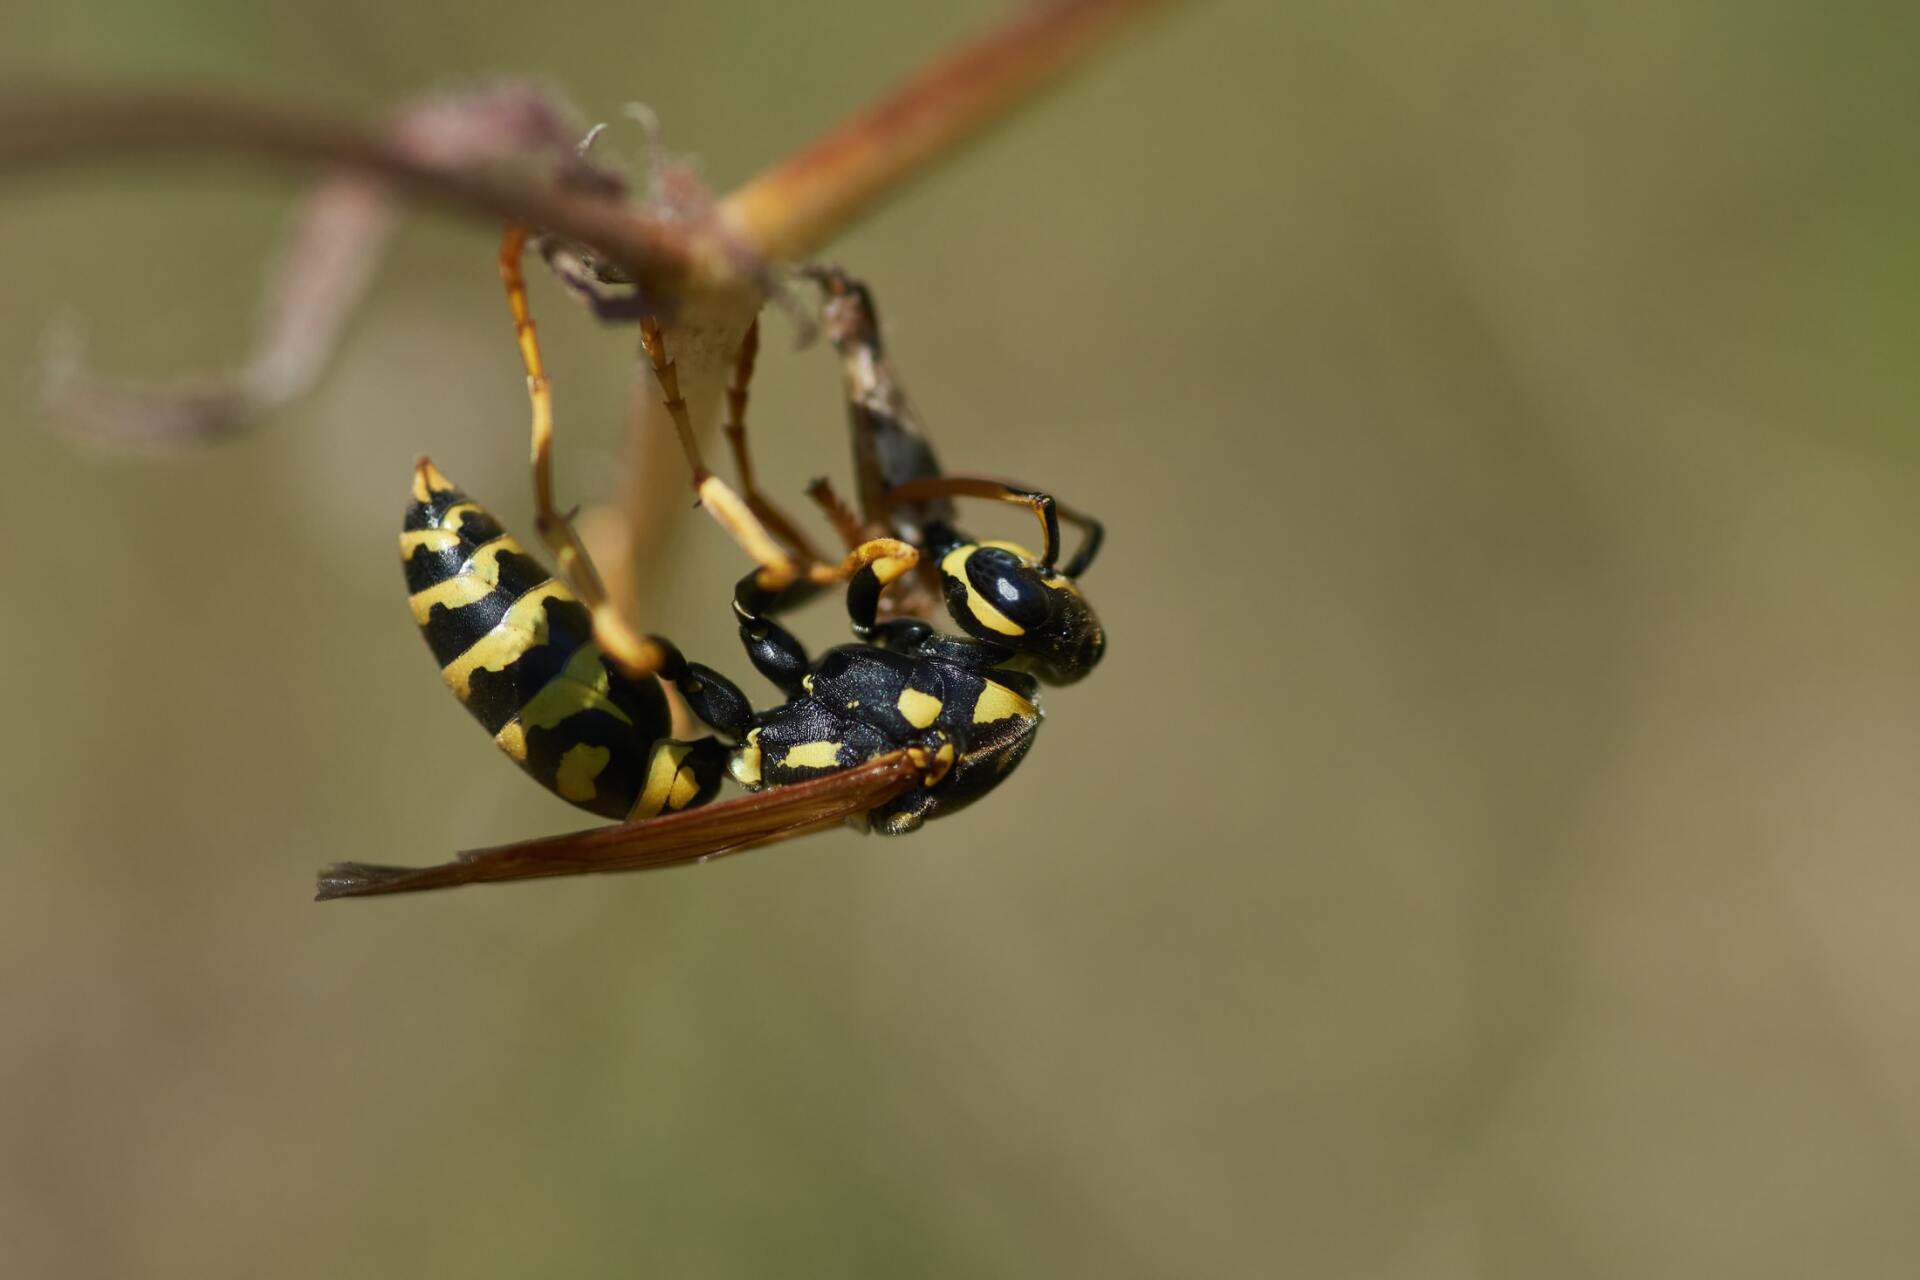 wasp and hornet pest control in vermont and new hampshire